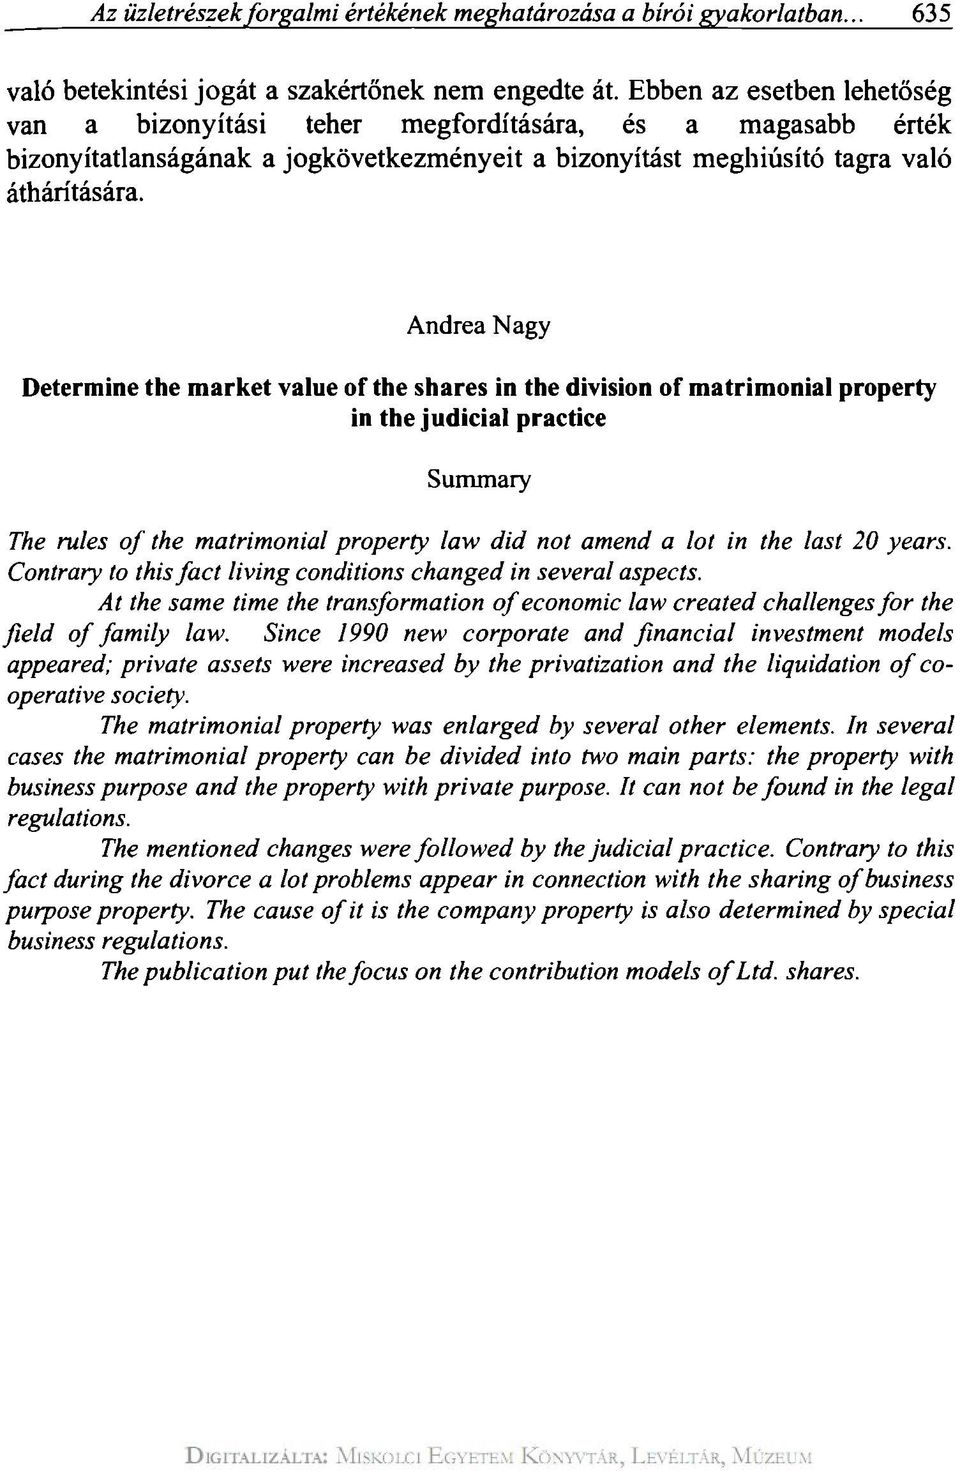 Andrea Nagy Determine the market value of the shares in the division of matrimonial property in the judicial practice Summary The rules of the matrimonial property law did not amend a lot in the last